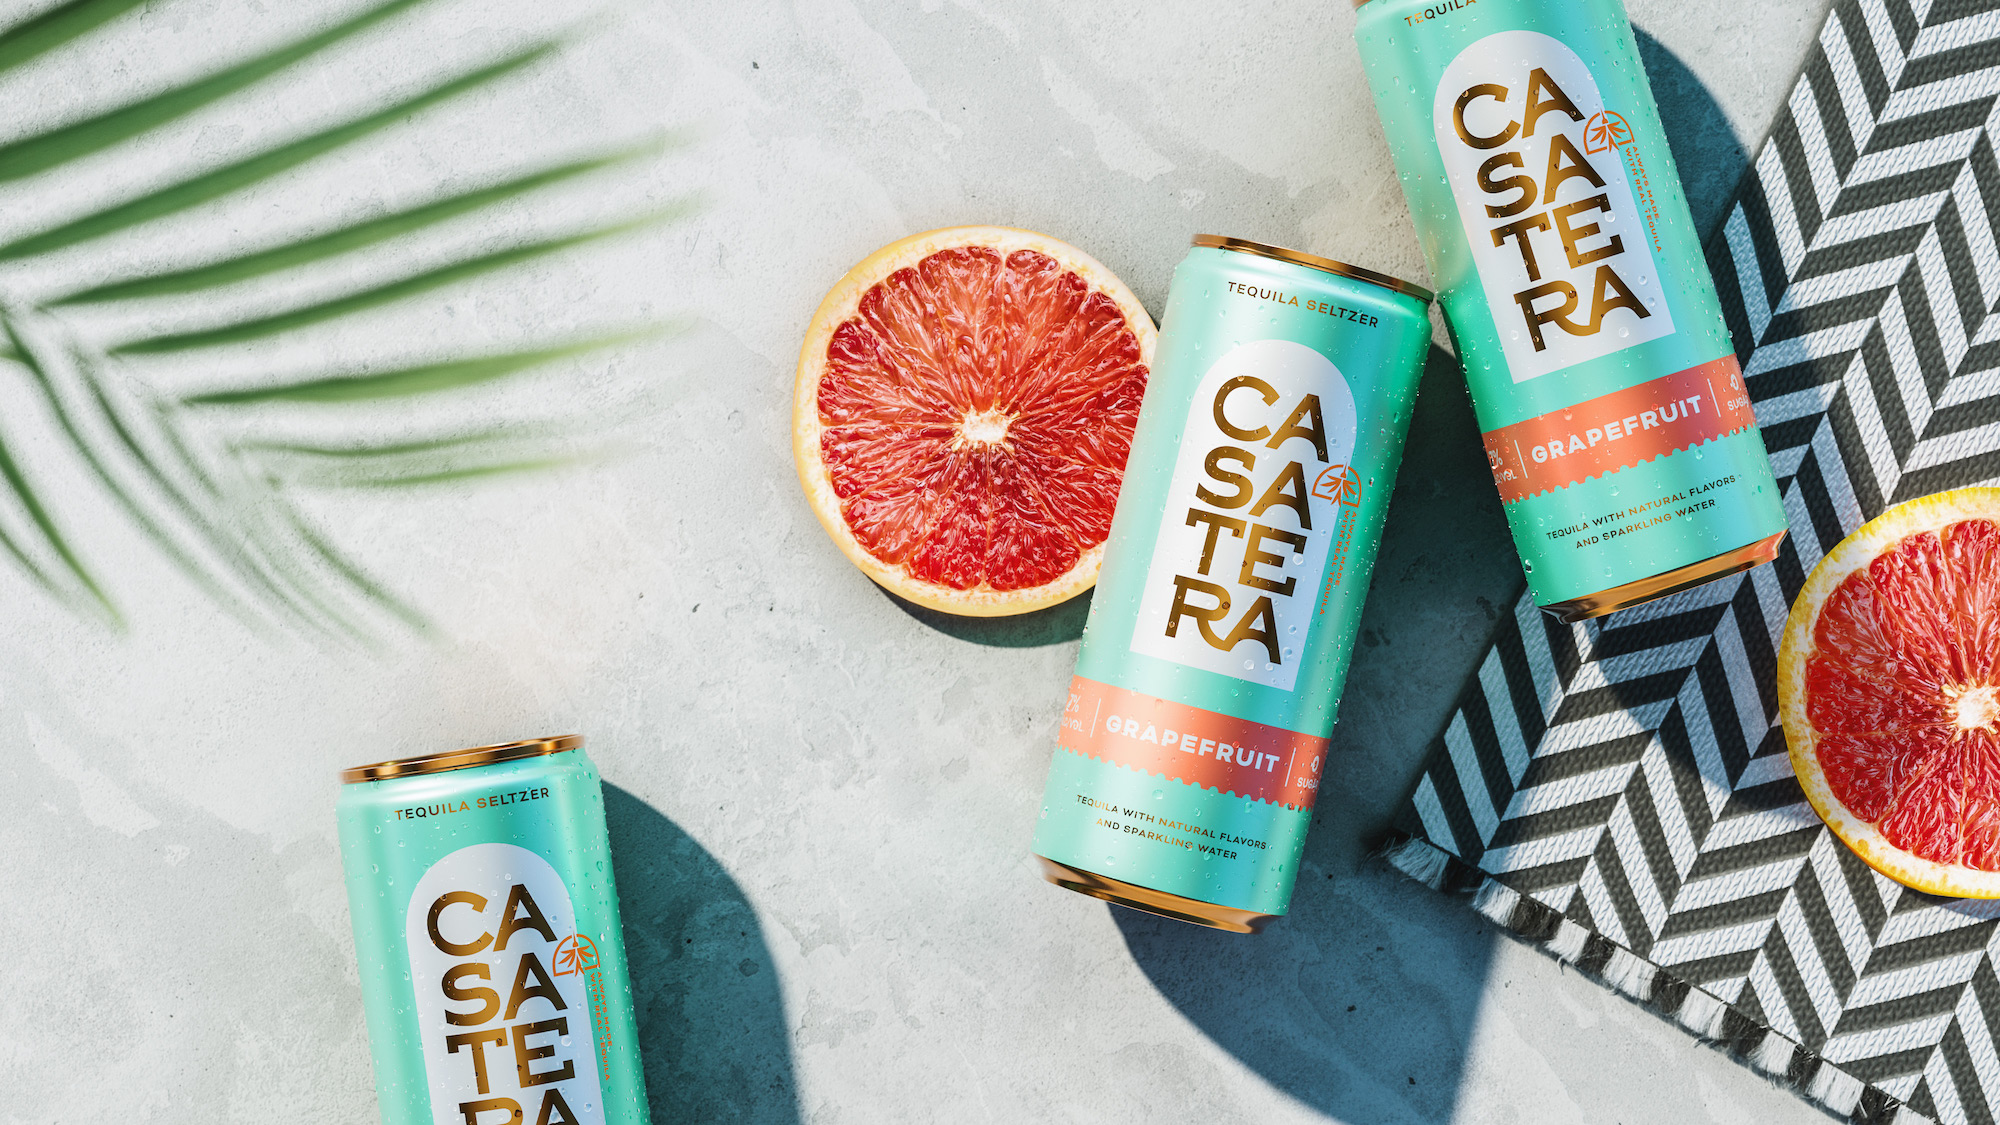 Casastera cans with grapefruit slices